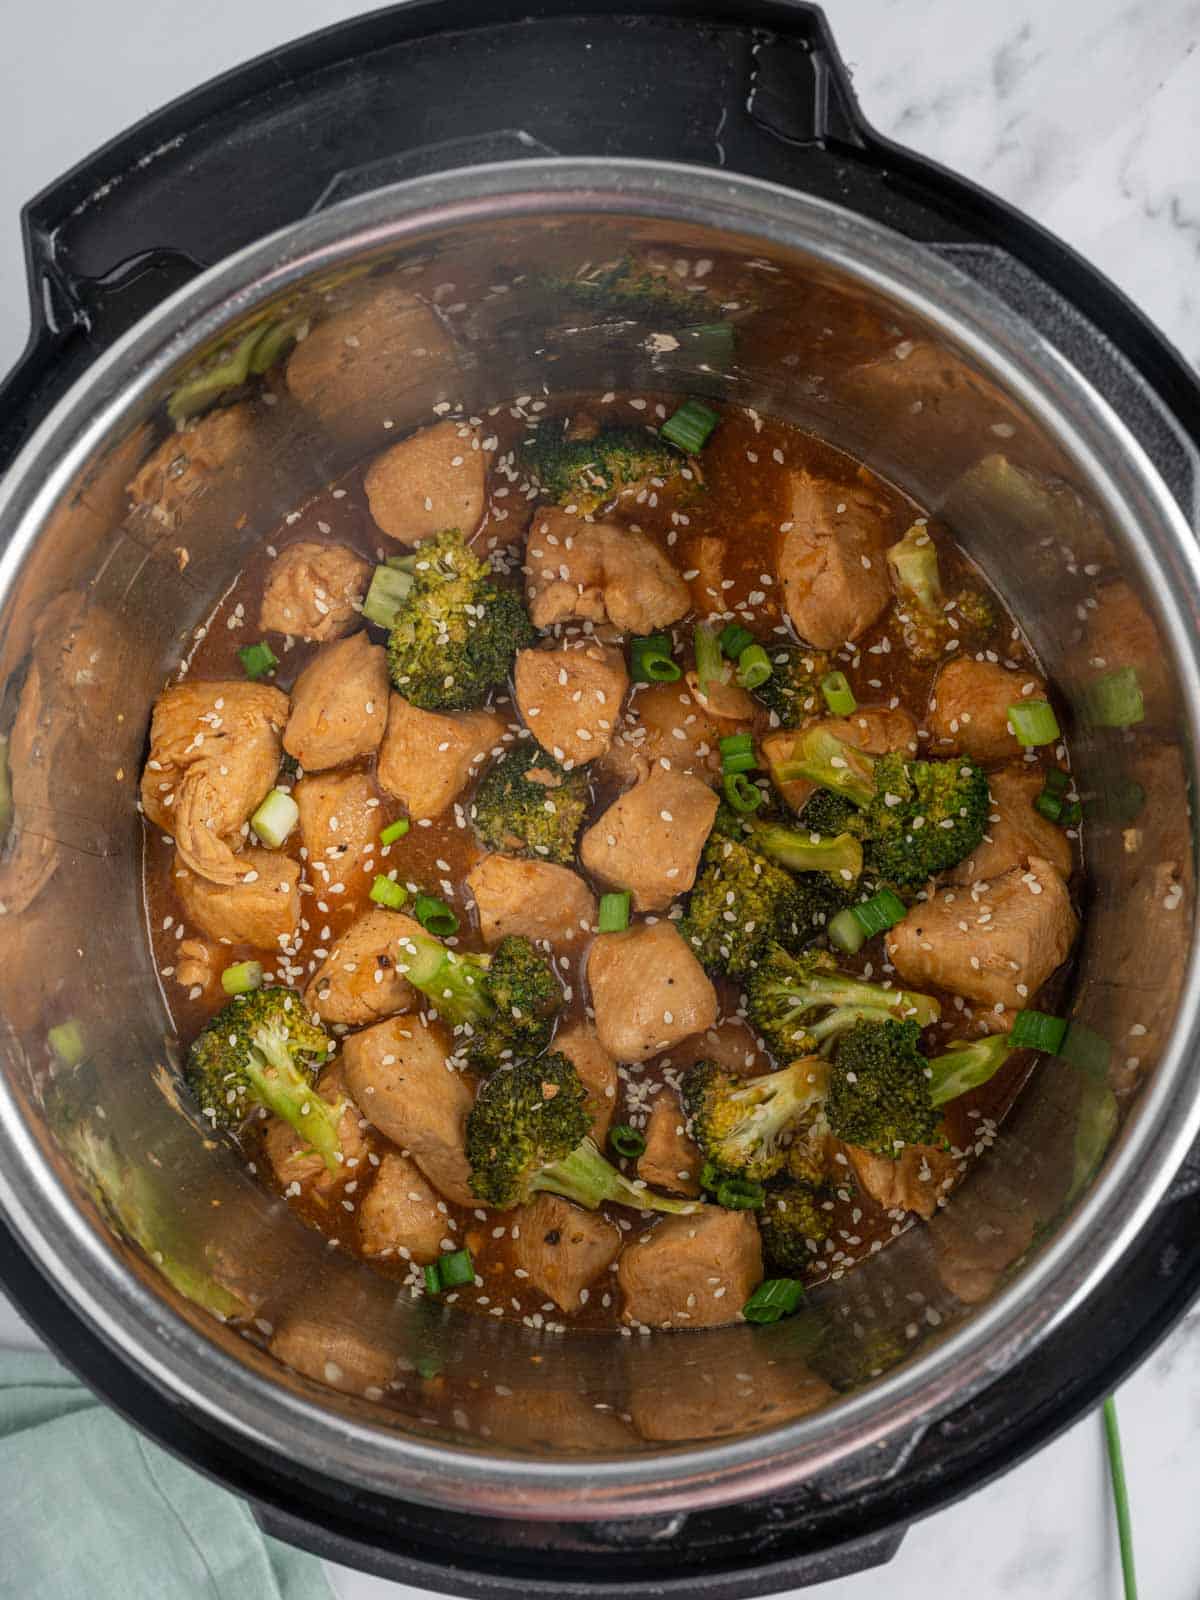 Chicken and broccoli in the instant pot.